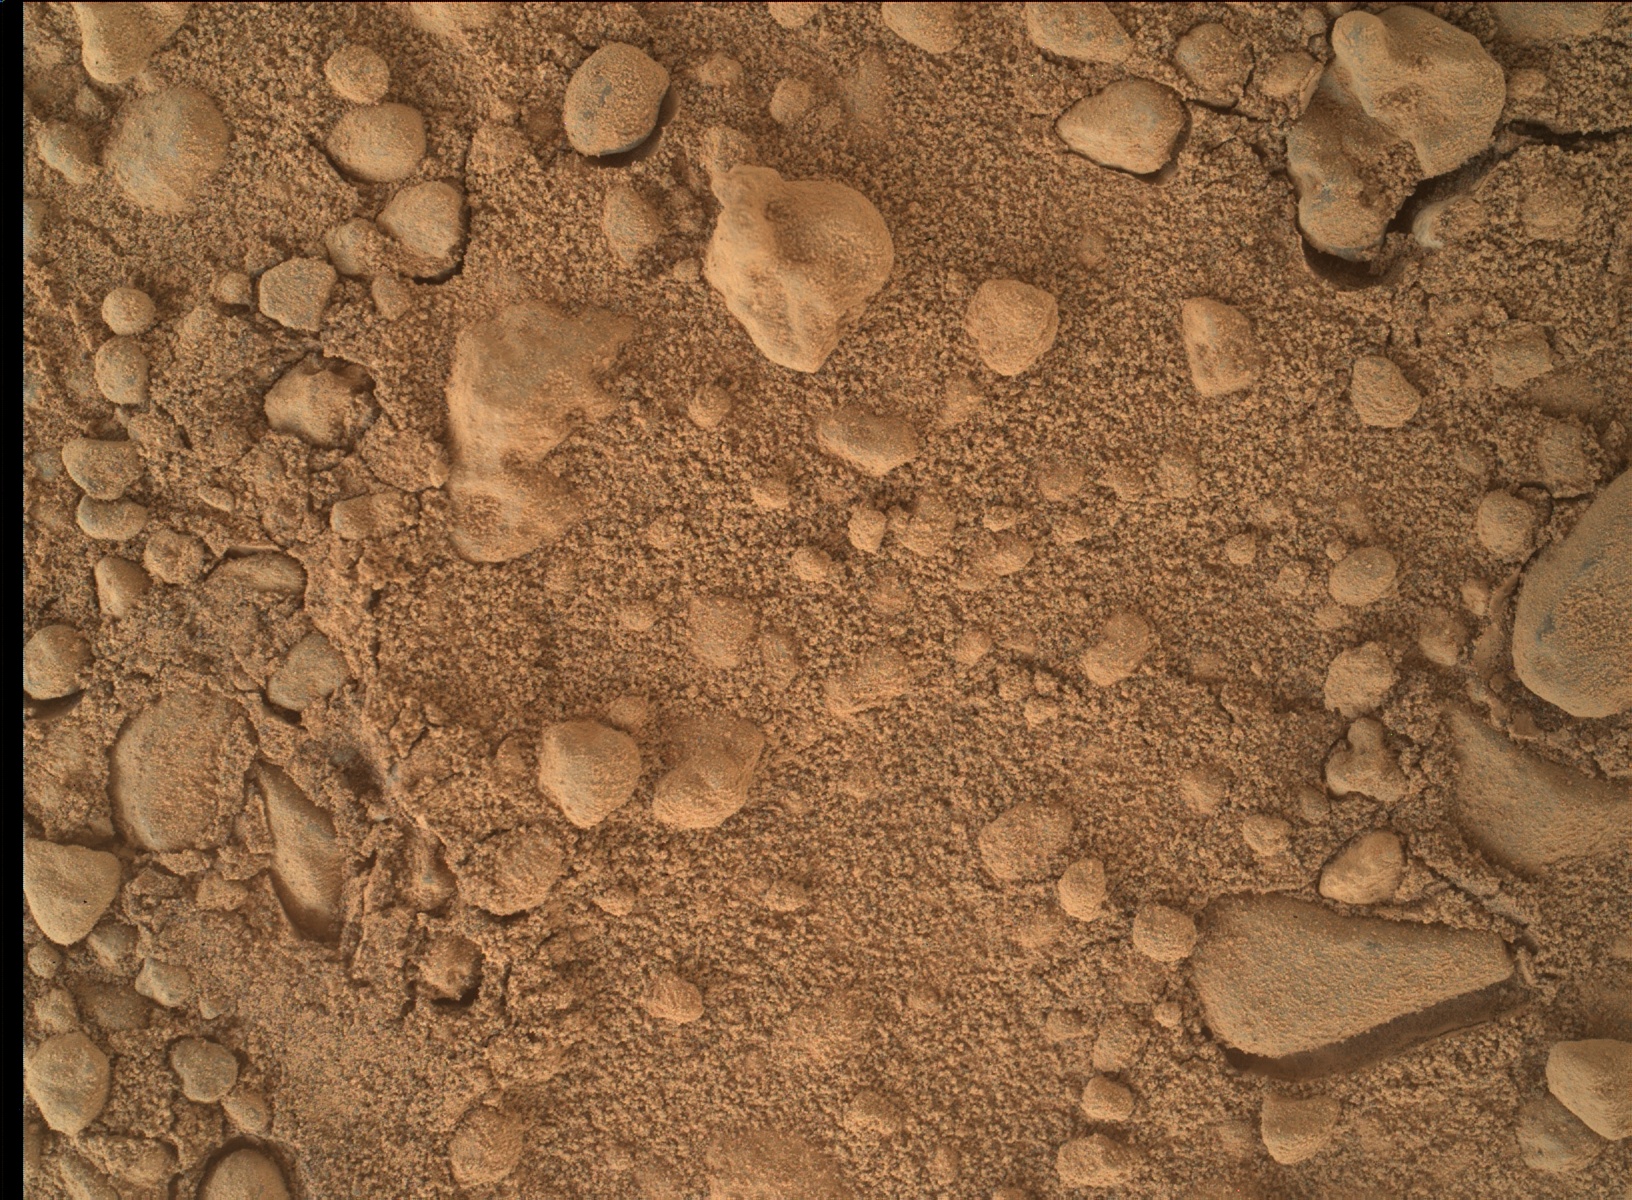 Nasa's Mars rover Curiosity acquired this image using its Mars Hand Lens Imager (MAHLI) on Sol 558